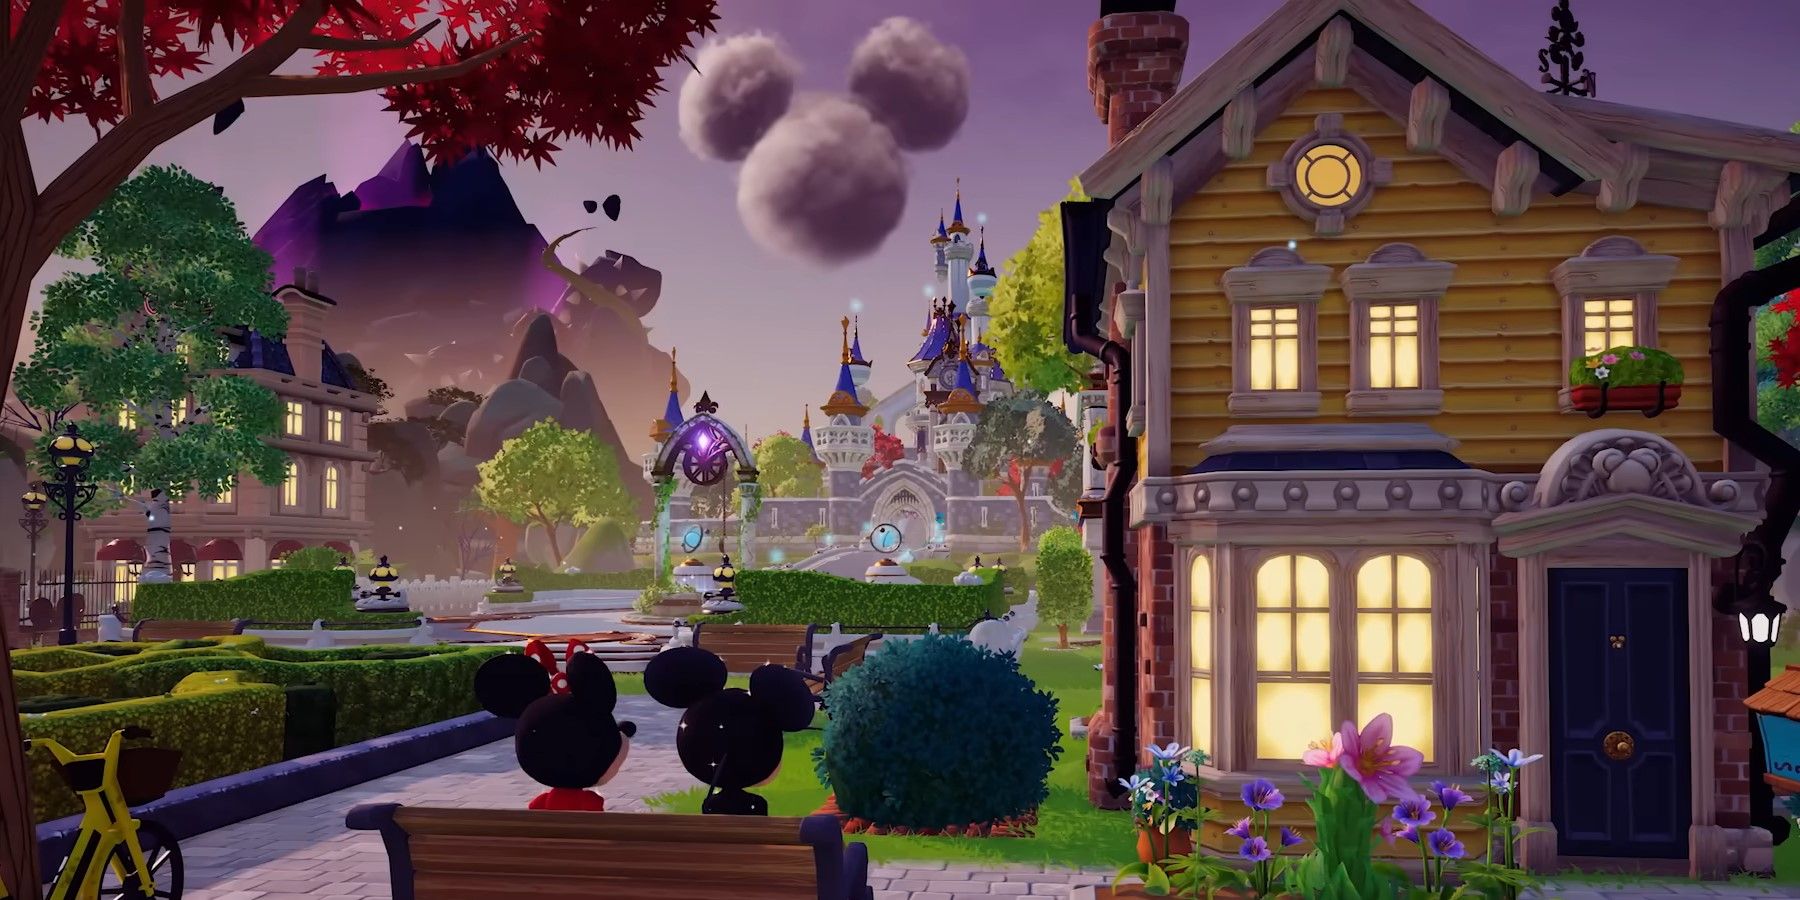 Clever Disney Dreamlight Valley Player Makes Mickey Mouse Art In-Game